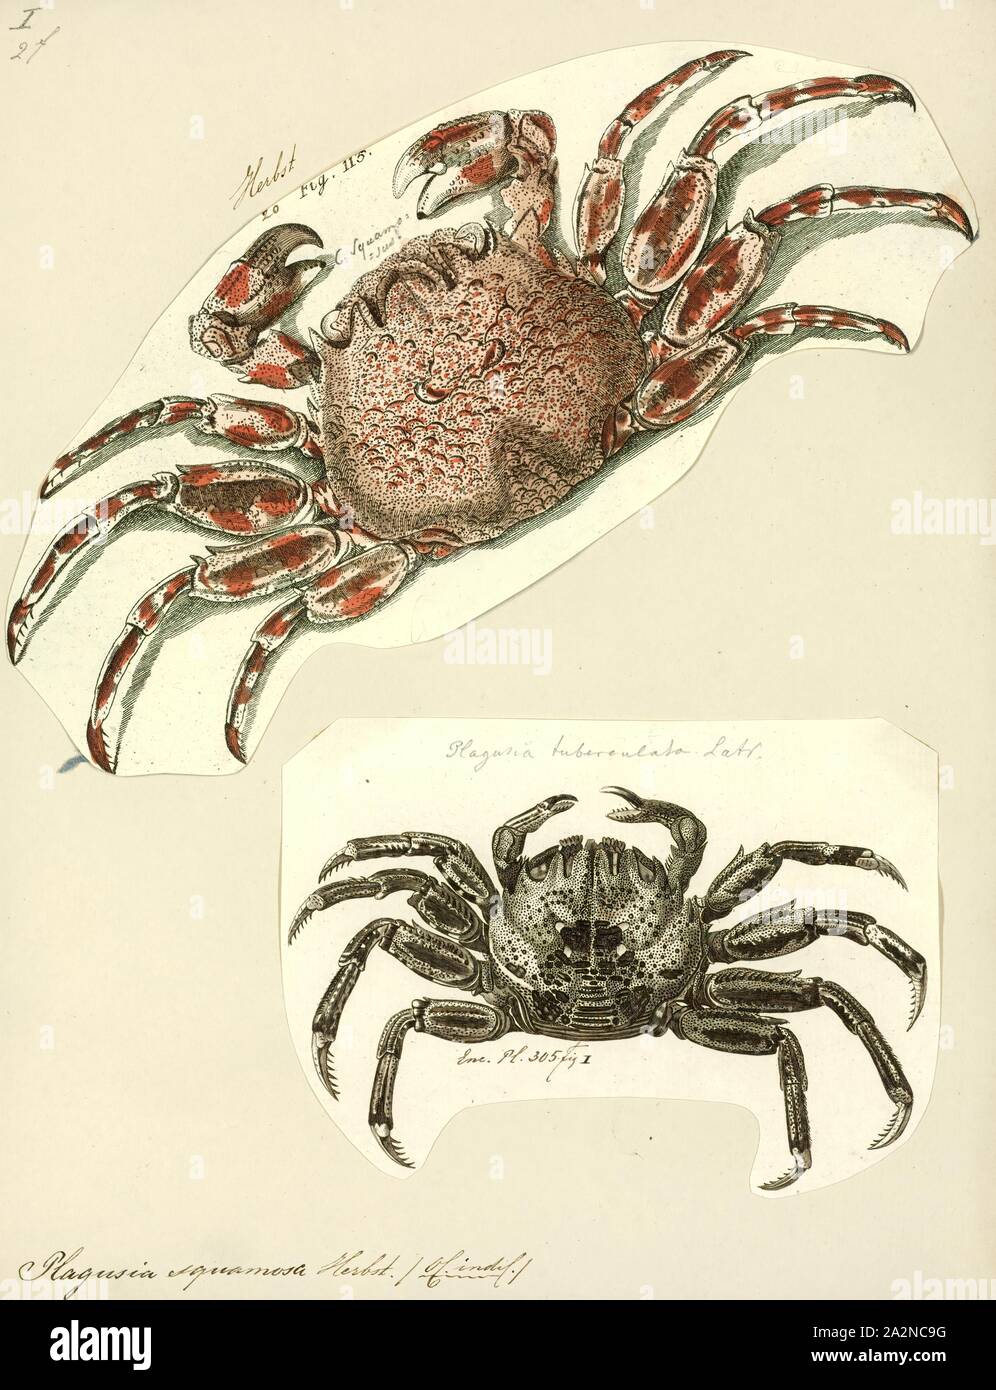 Plagusia squamosa, Print, Plagusia squamosa is a marine crab of the family Plagusiidae, formerly considered a subspecies of Plagusia depressa (as P. d. tuberculata). It is found in tropical Indo-Pacific oceans. P. squamosa's carapace is bumpy and quite coarse, seemingly scaly, leading to its common name: The Scaly Rock Crab Stock Photo